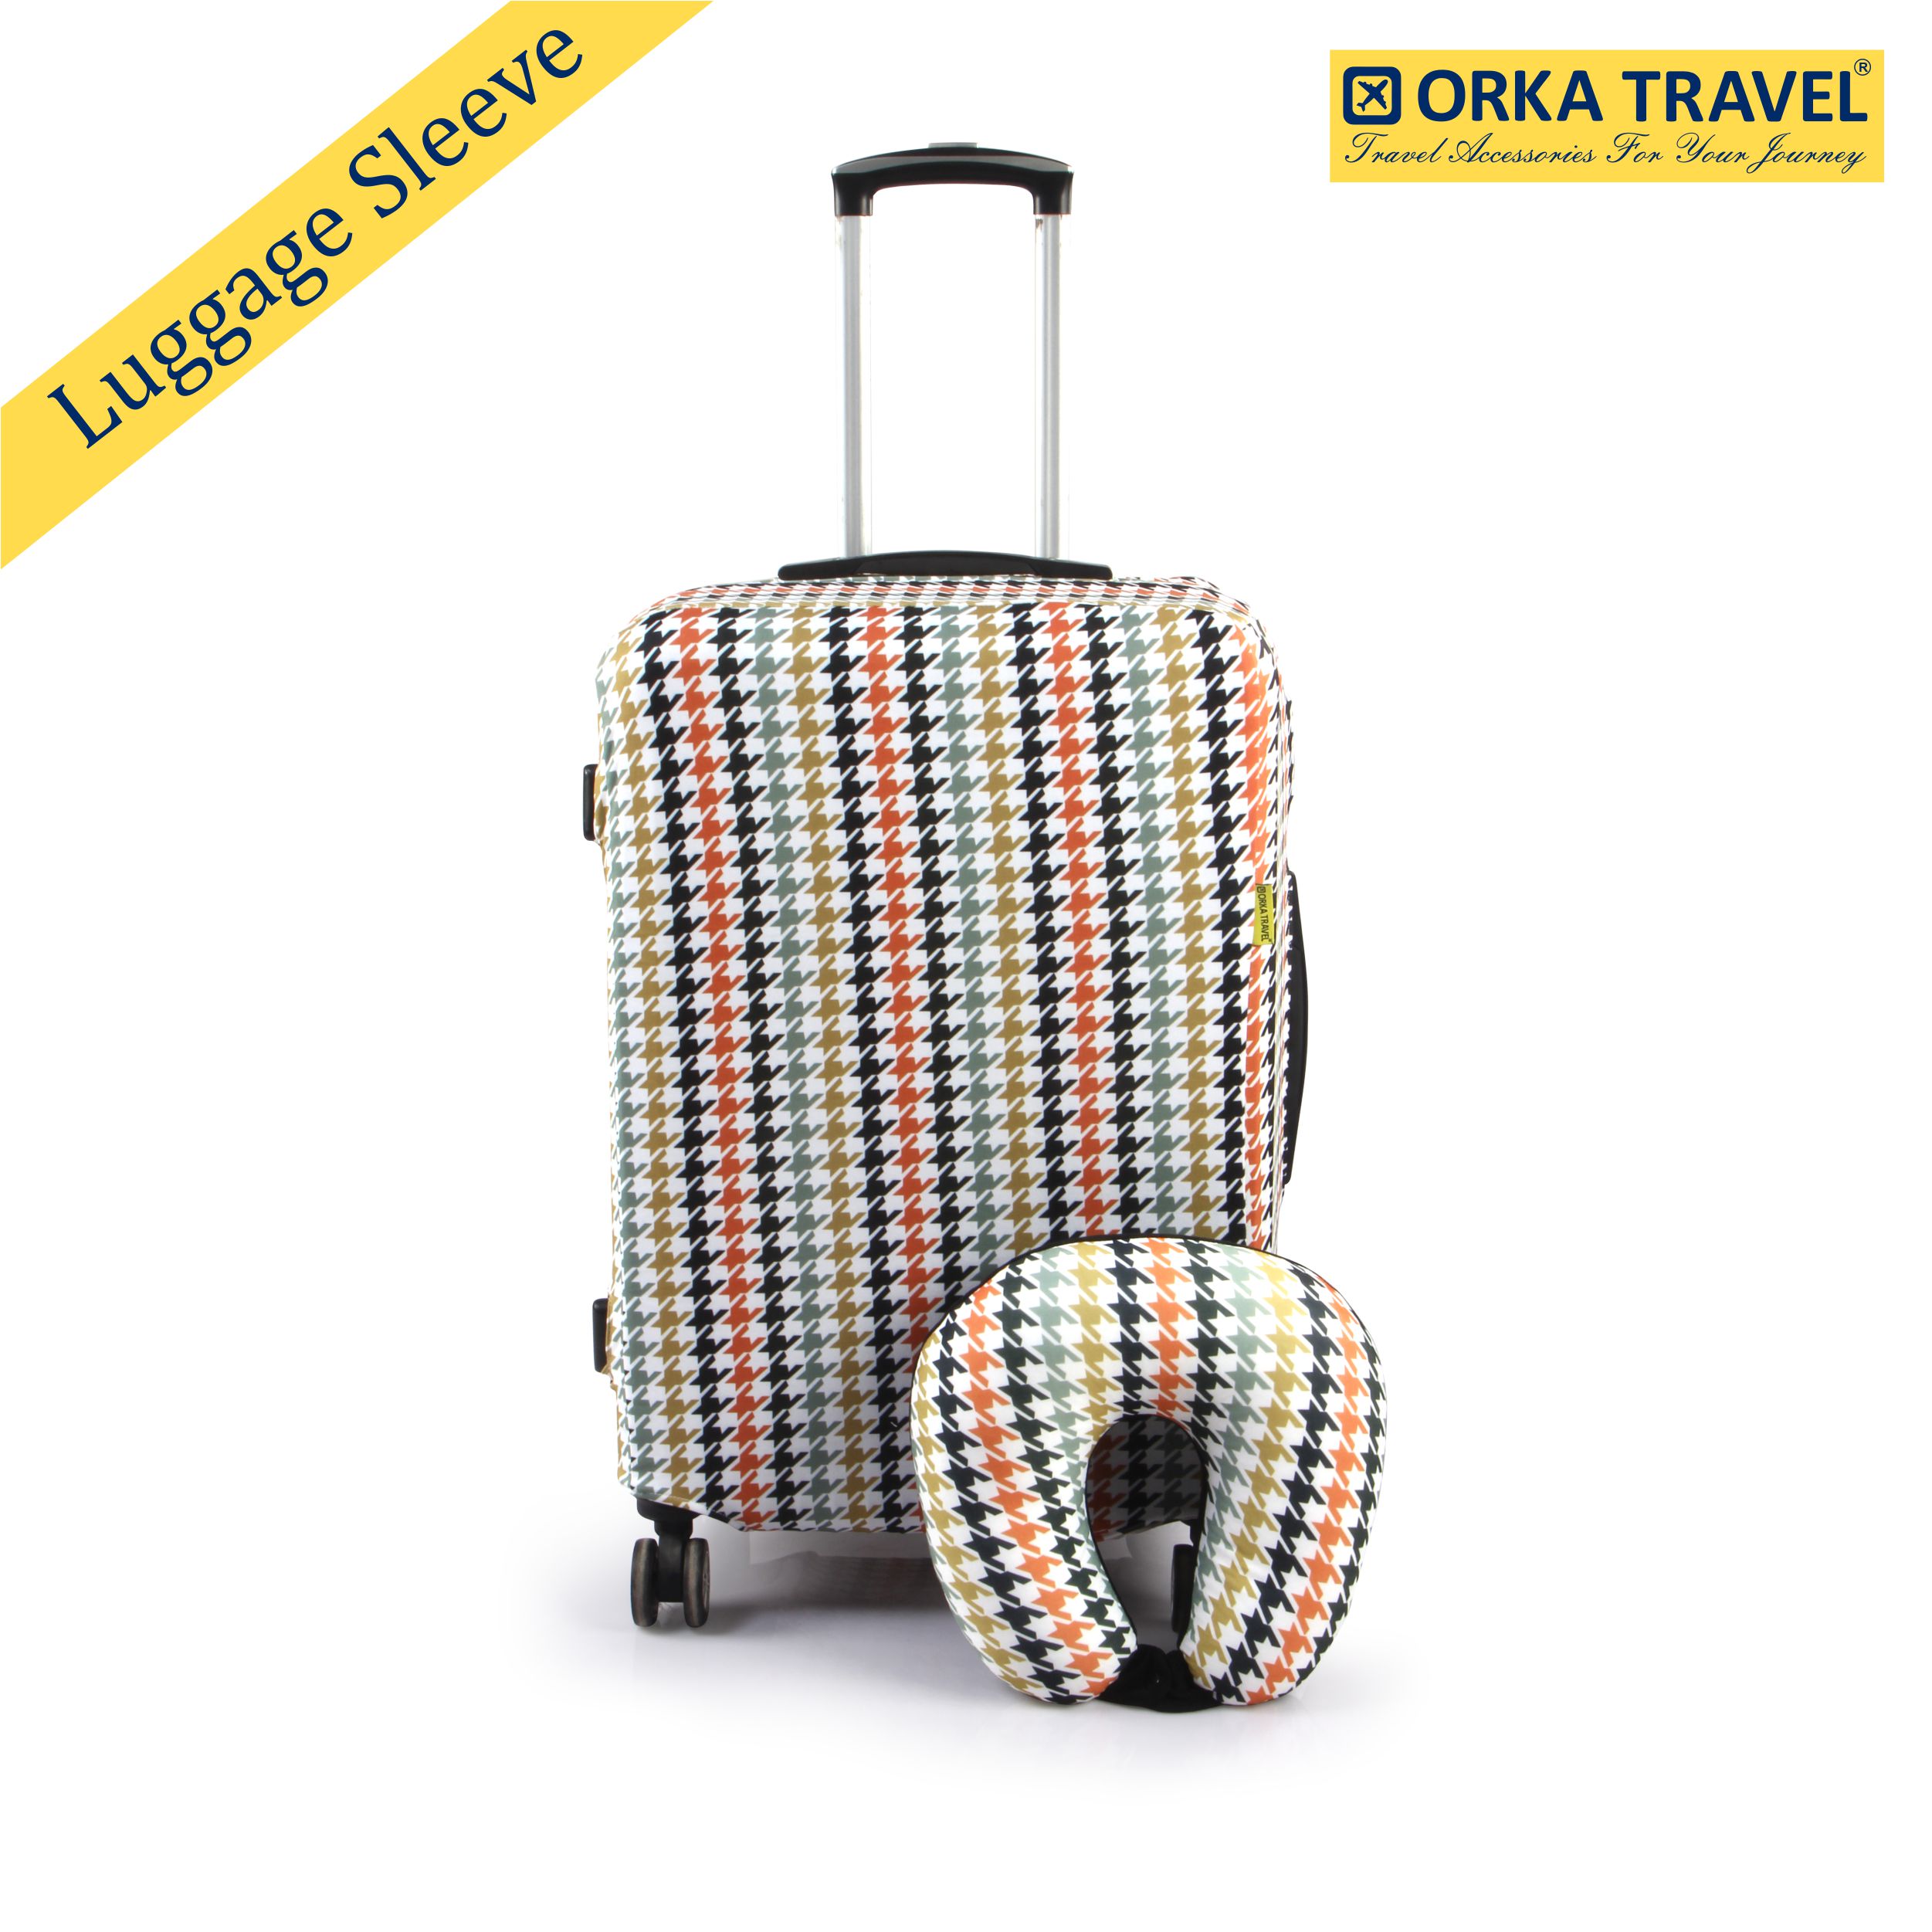 ORKA TRAVEL Houndstooth Theme LUGGAGE PROTECTOR WITH MATCHING U NECK PILLOW LUGGAGE COVER  